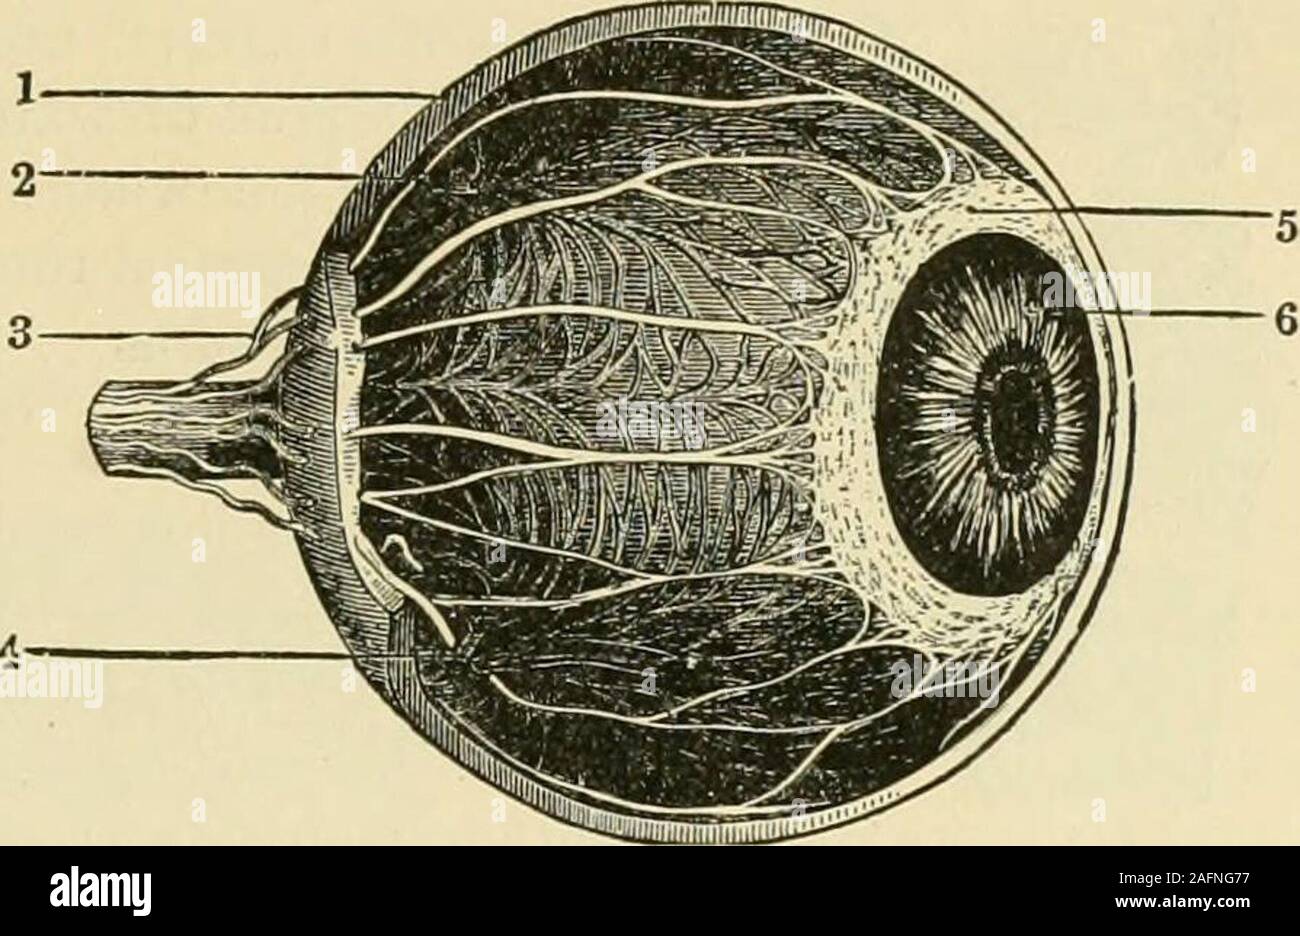 . The standard horse book, comprising the taming, controlling and education of unbroken and vicious horses. Fk;. S96. a, Optic nerve; b, Sclerotic; e, Choroid; d, Retina; e, Cornea; t, Iris; g, li. Ciliary circle;i, Insertion on crystalline lens; j. Crystalline lens; k, Crystalline capsule; 1, Vitreous body; m,n, Anterior and posterior chambers; o, Membrane of aqueous humor; p, p. Tarsi; q, q, Fi-brous membrane of eyelids; r, Elevator muscle of upper eyelid; s, s, Orbicularis muscle of eye-lids; t, t, Skin of Eyelids; u, Conjunctiva; v, Membrane covering cornea; x, Posterior rectusmuscle ; y, Stock Photo